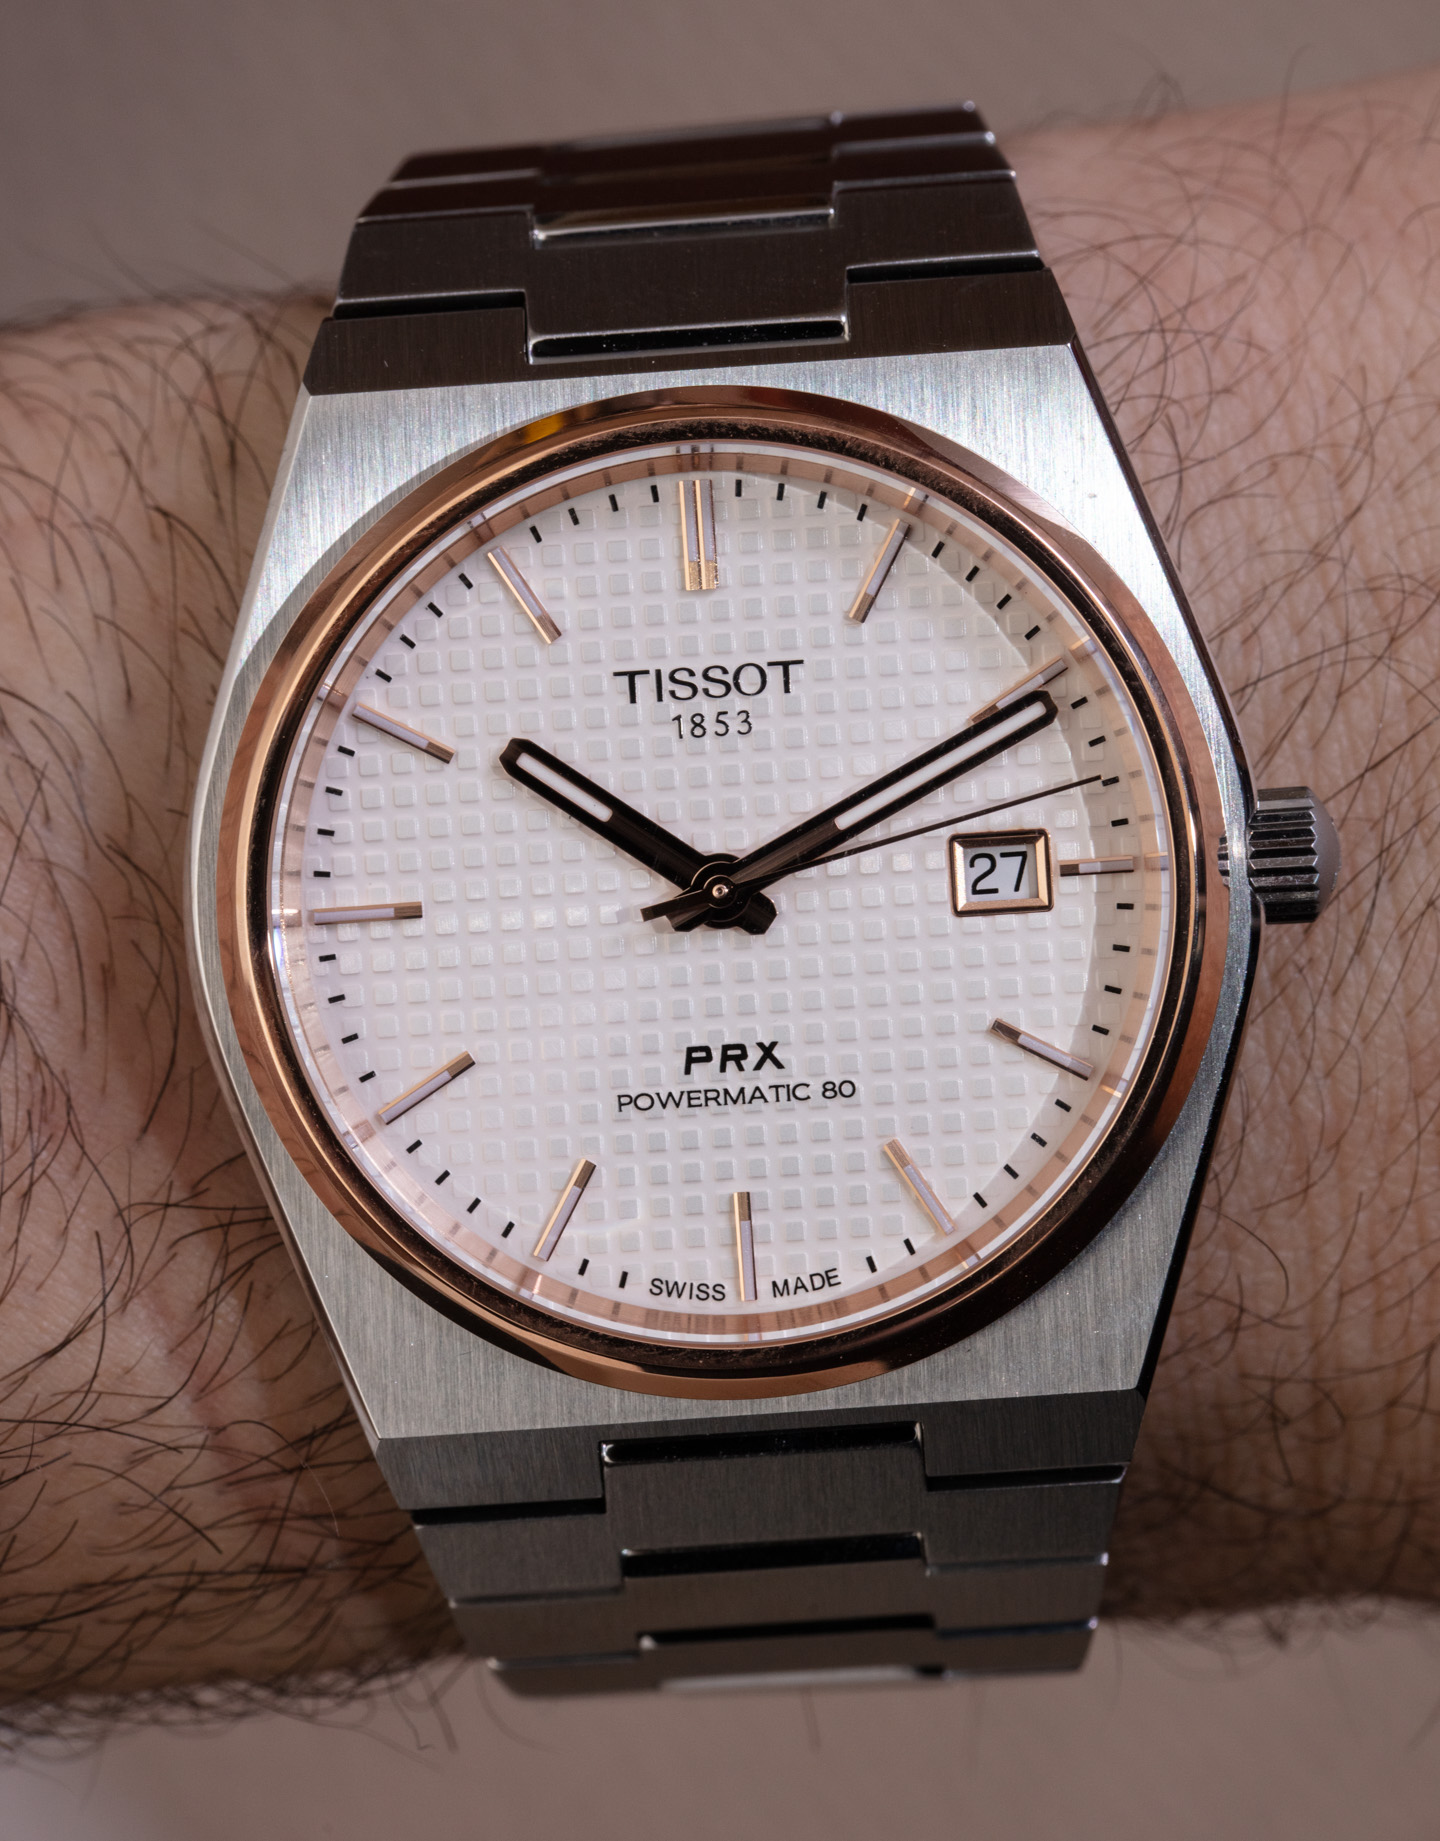 The Tissot PRX : Overrated or Overhated? (Watch review) - YouTube